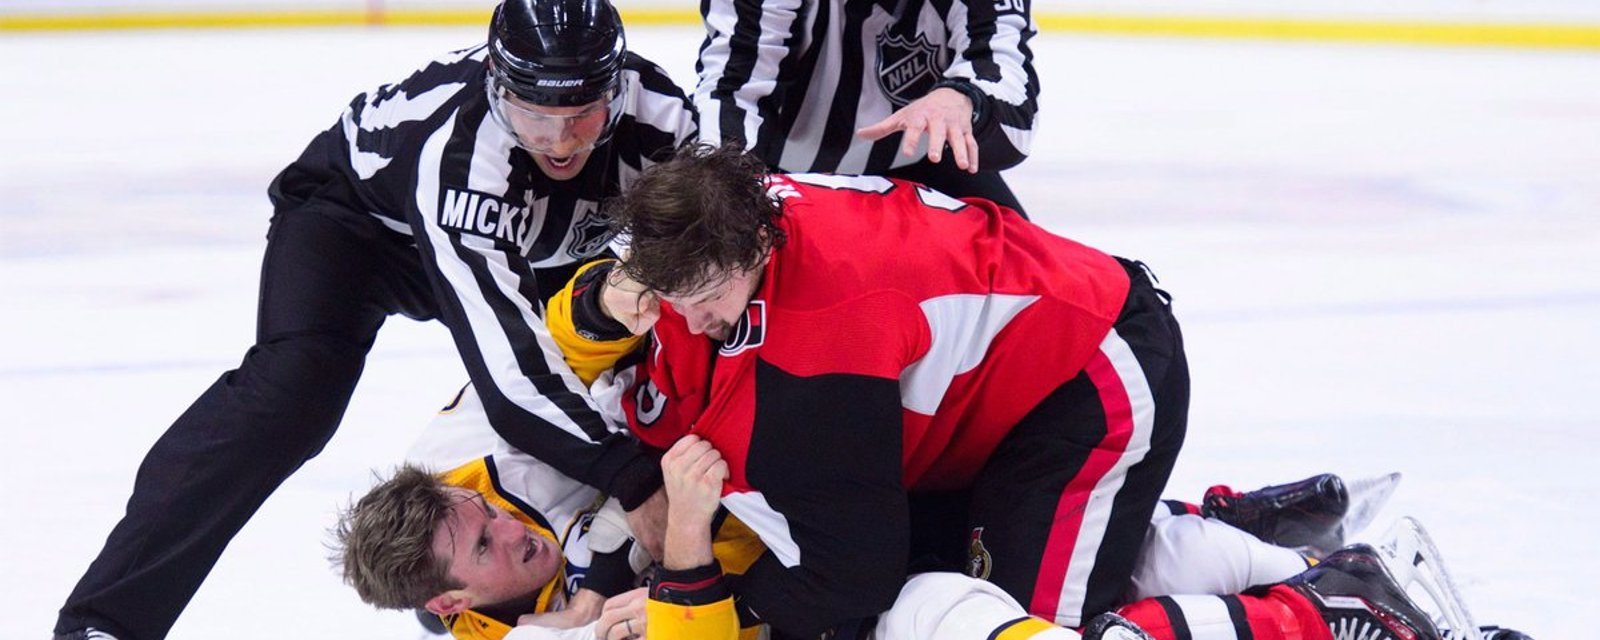 Ryan reveals why he punched good friend and former teammate Turris in the face! 